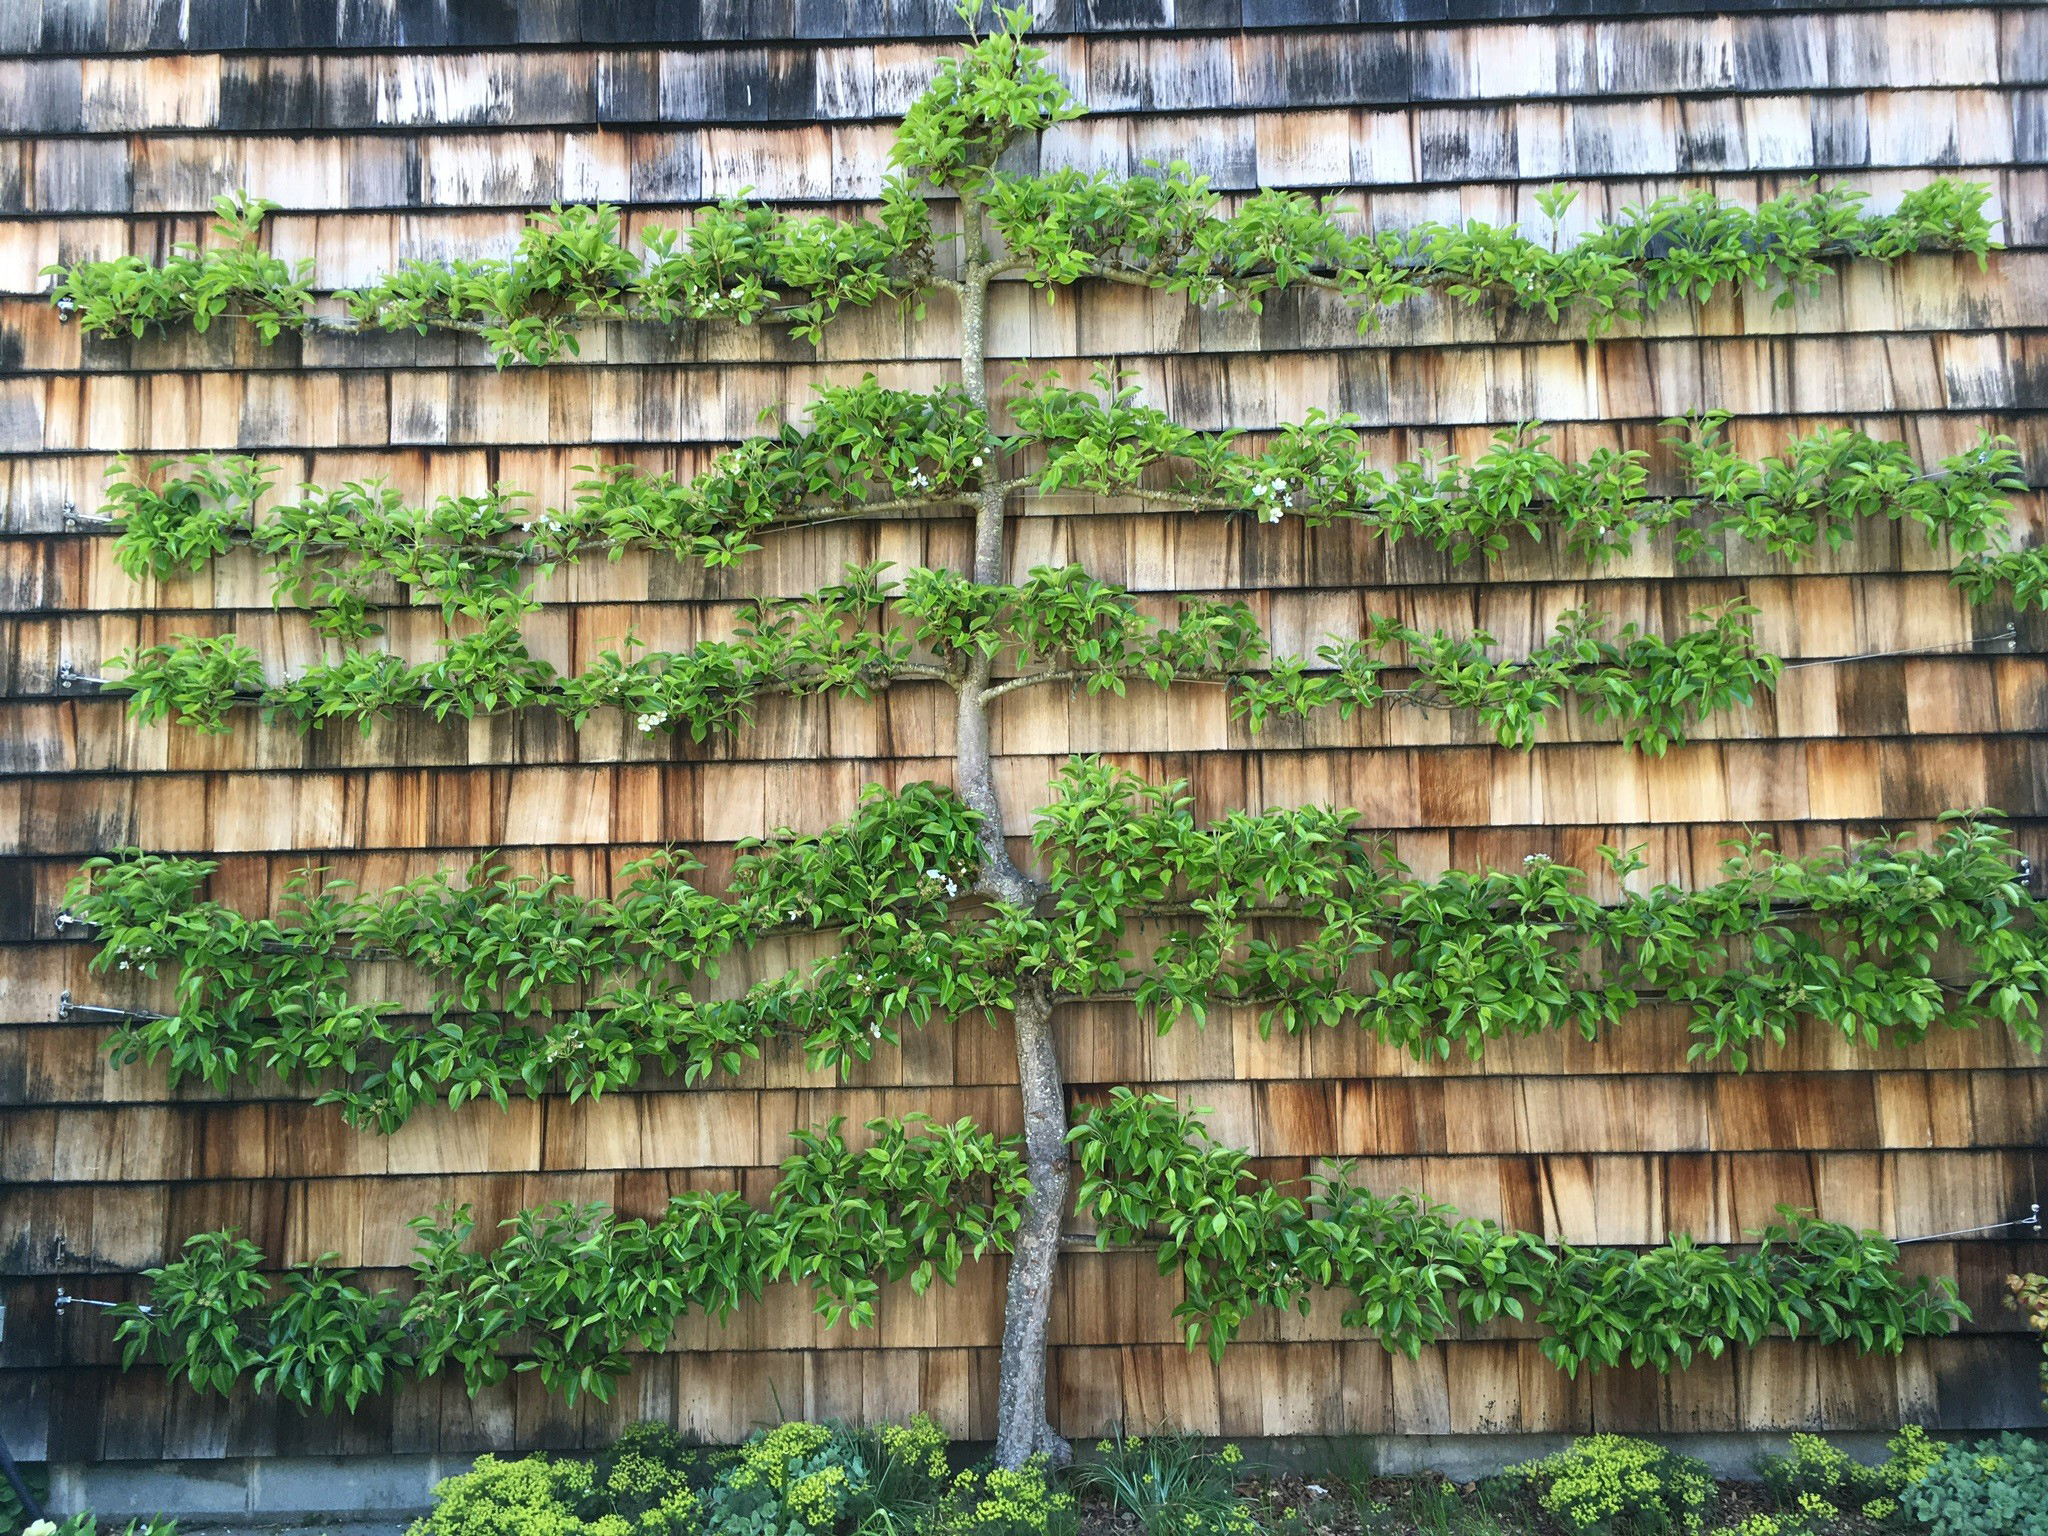 A pear espalier in the 